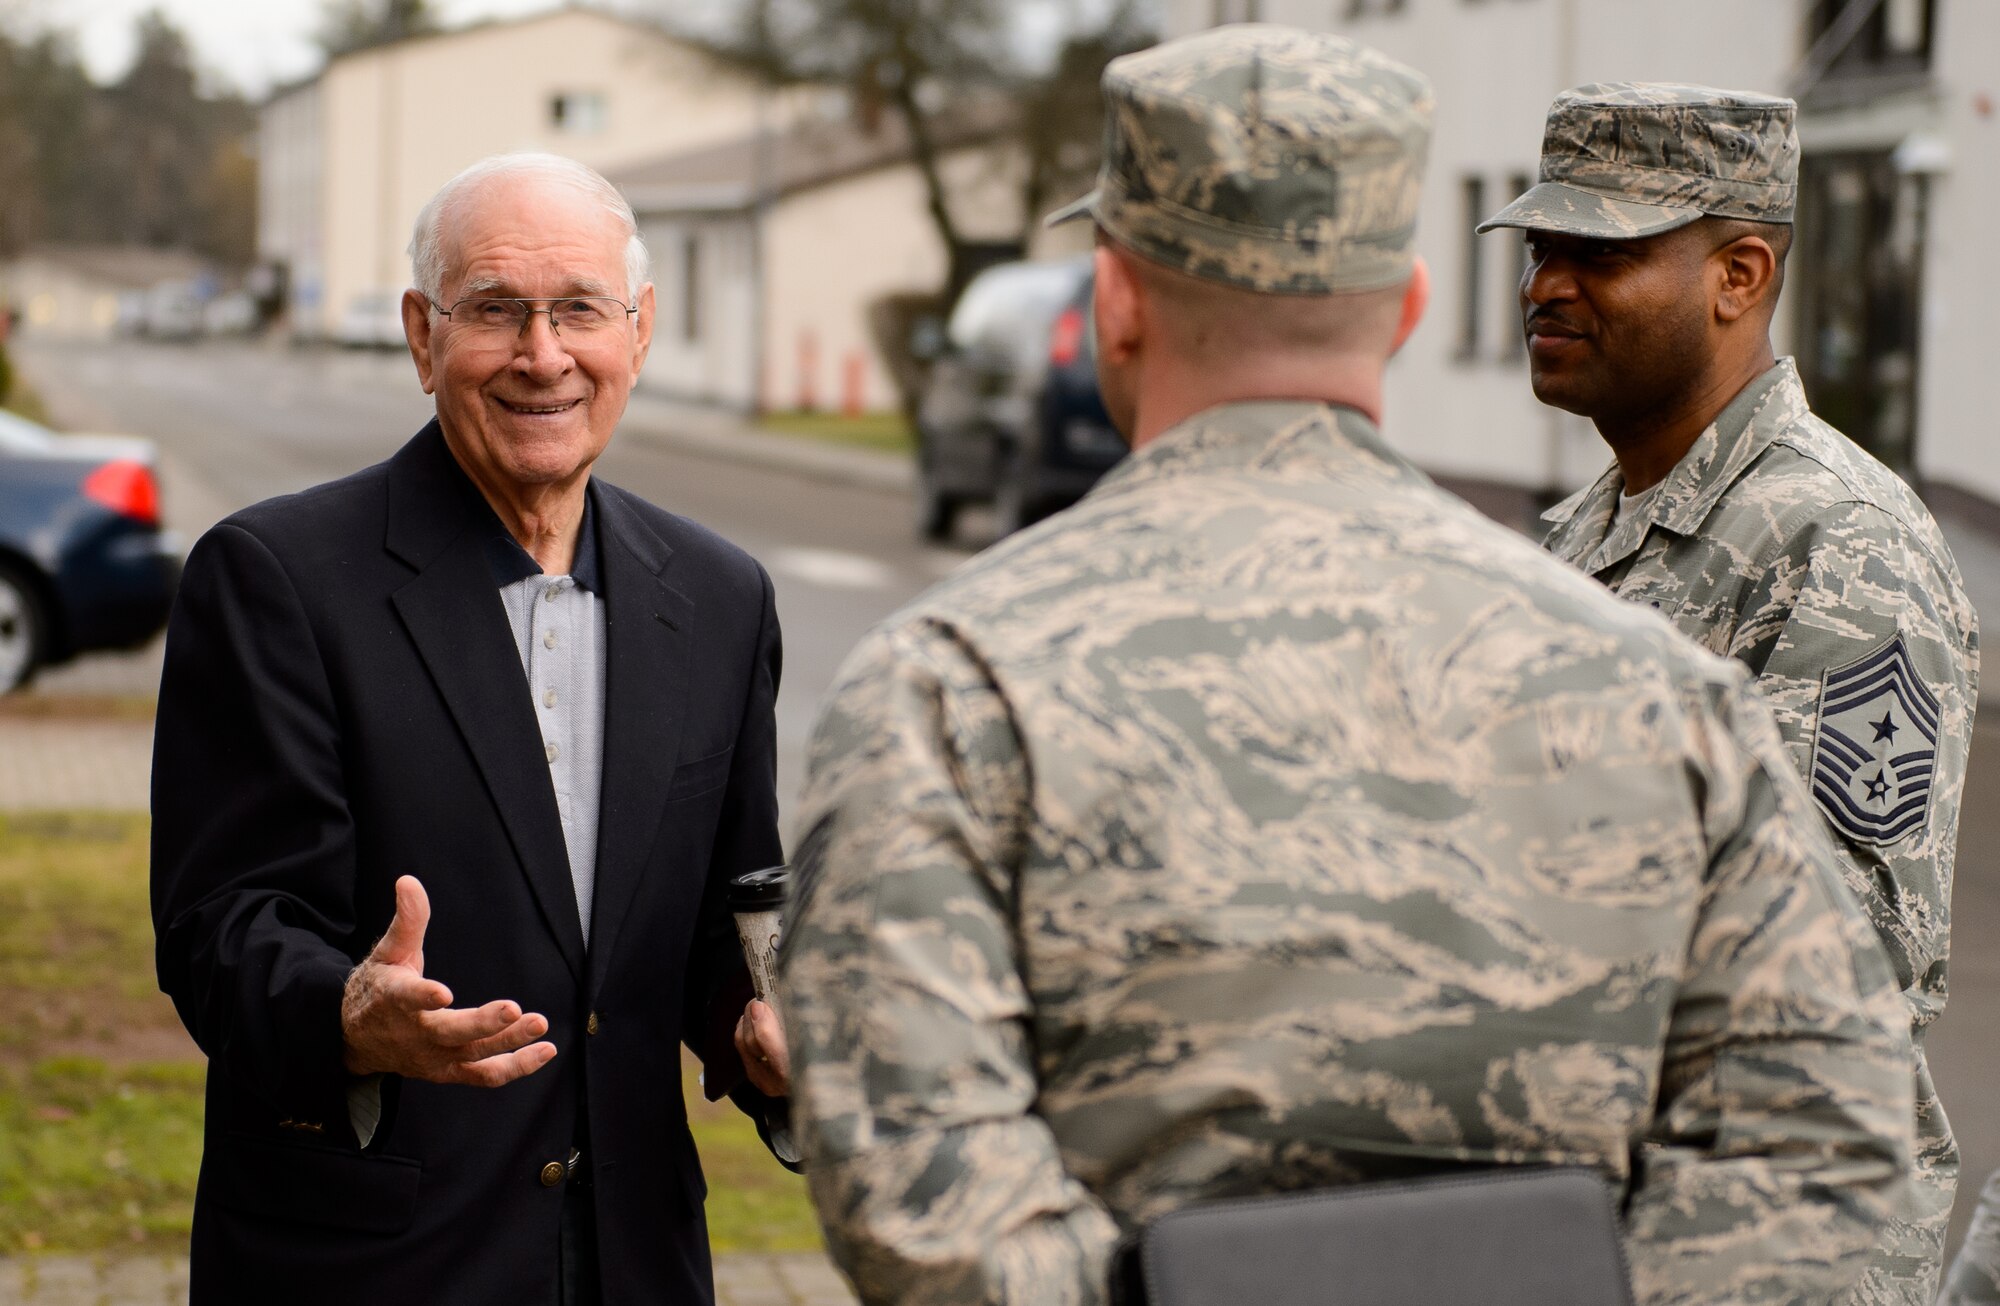 Sam E. Parish, retired Chief Master Sergeant of the Air Force, jokes with instructors of the Ramstein Airmen Leadership School Jan. 27, 2016, at Ramstein Air Base, Germany. Parish visited a variety of location around Germany and spoke with several organizations about their projects and how Airmen are taught professional military education. (U.S. Air Force photo/Staff Sgt. Armando A. Schwier-Morales)